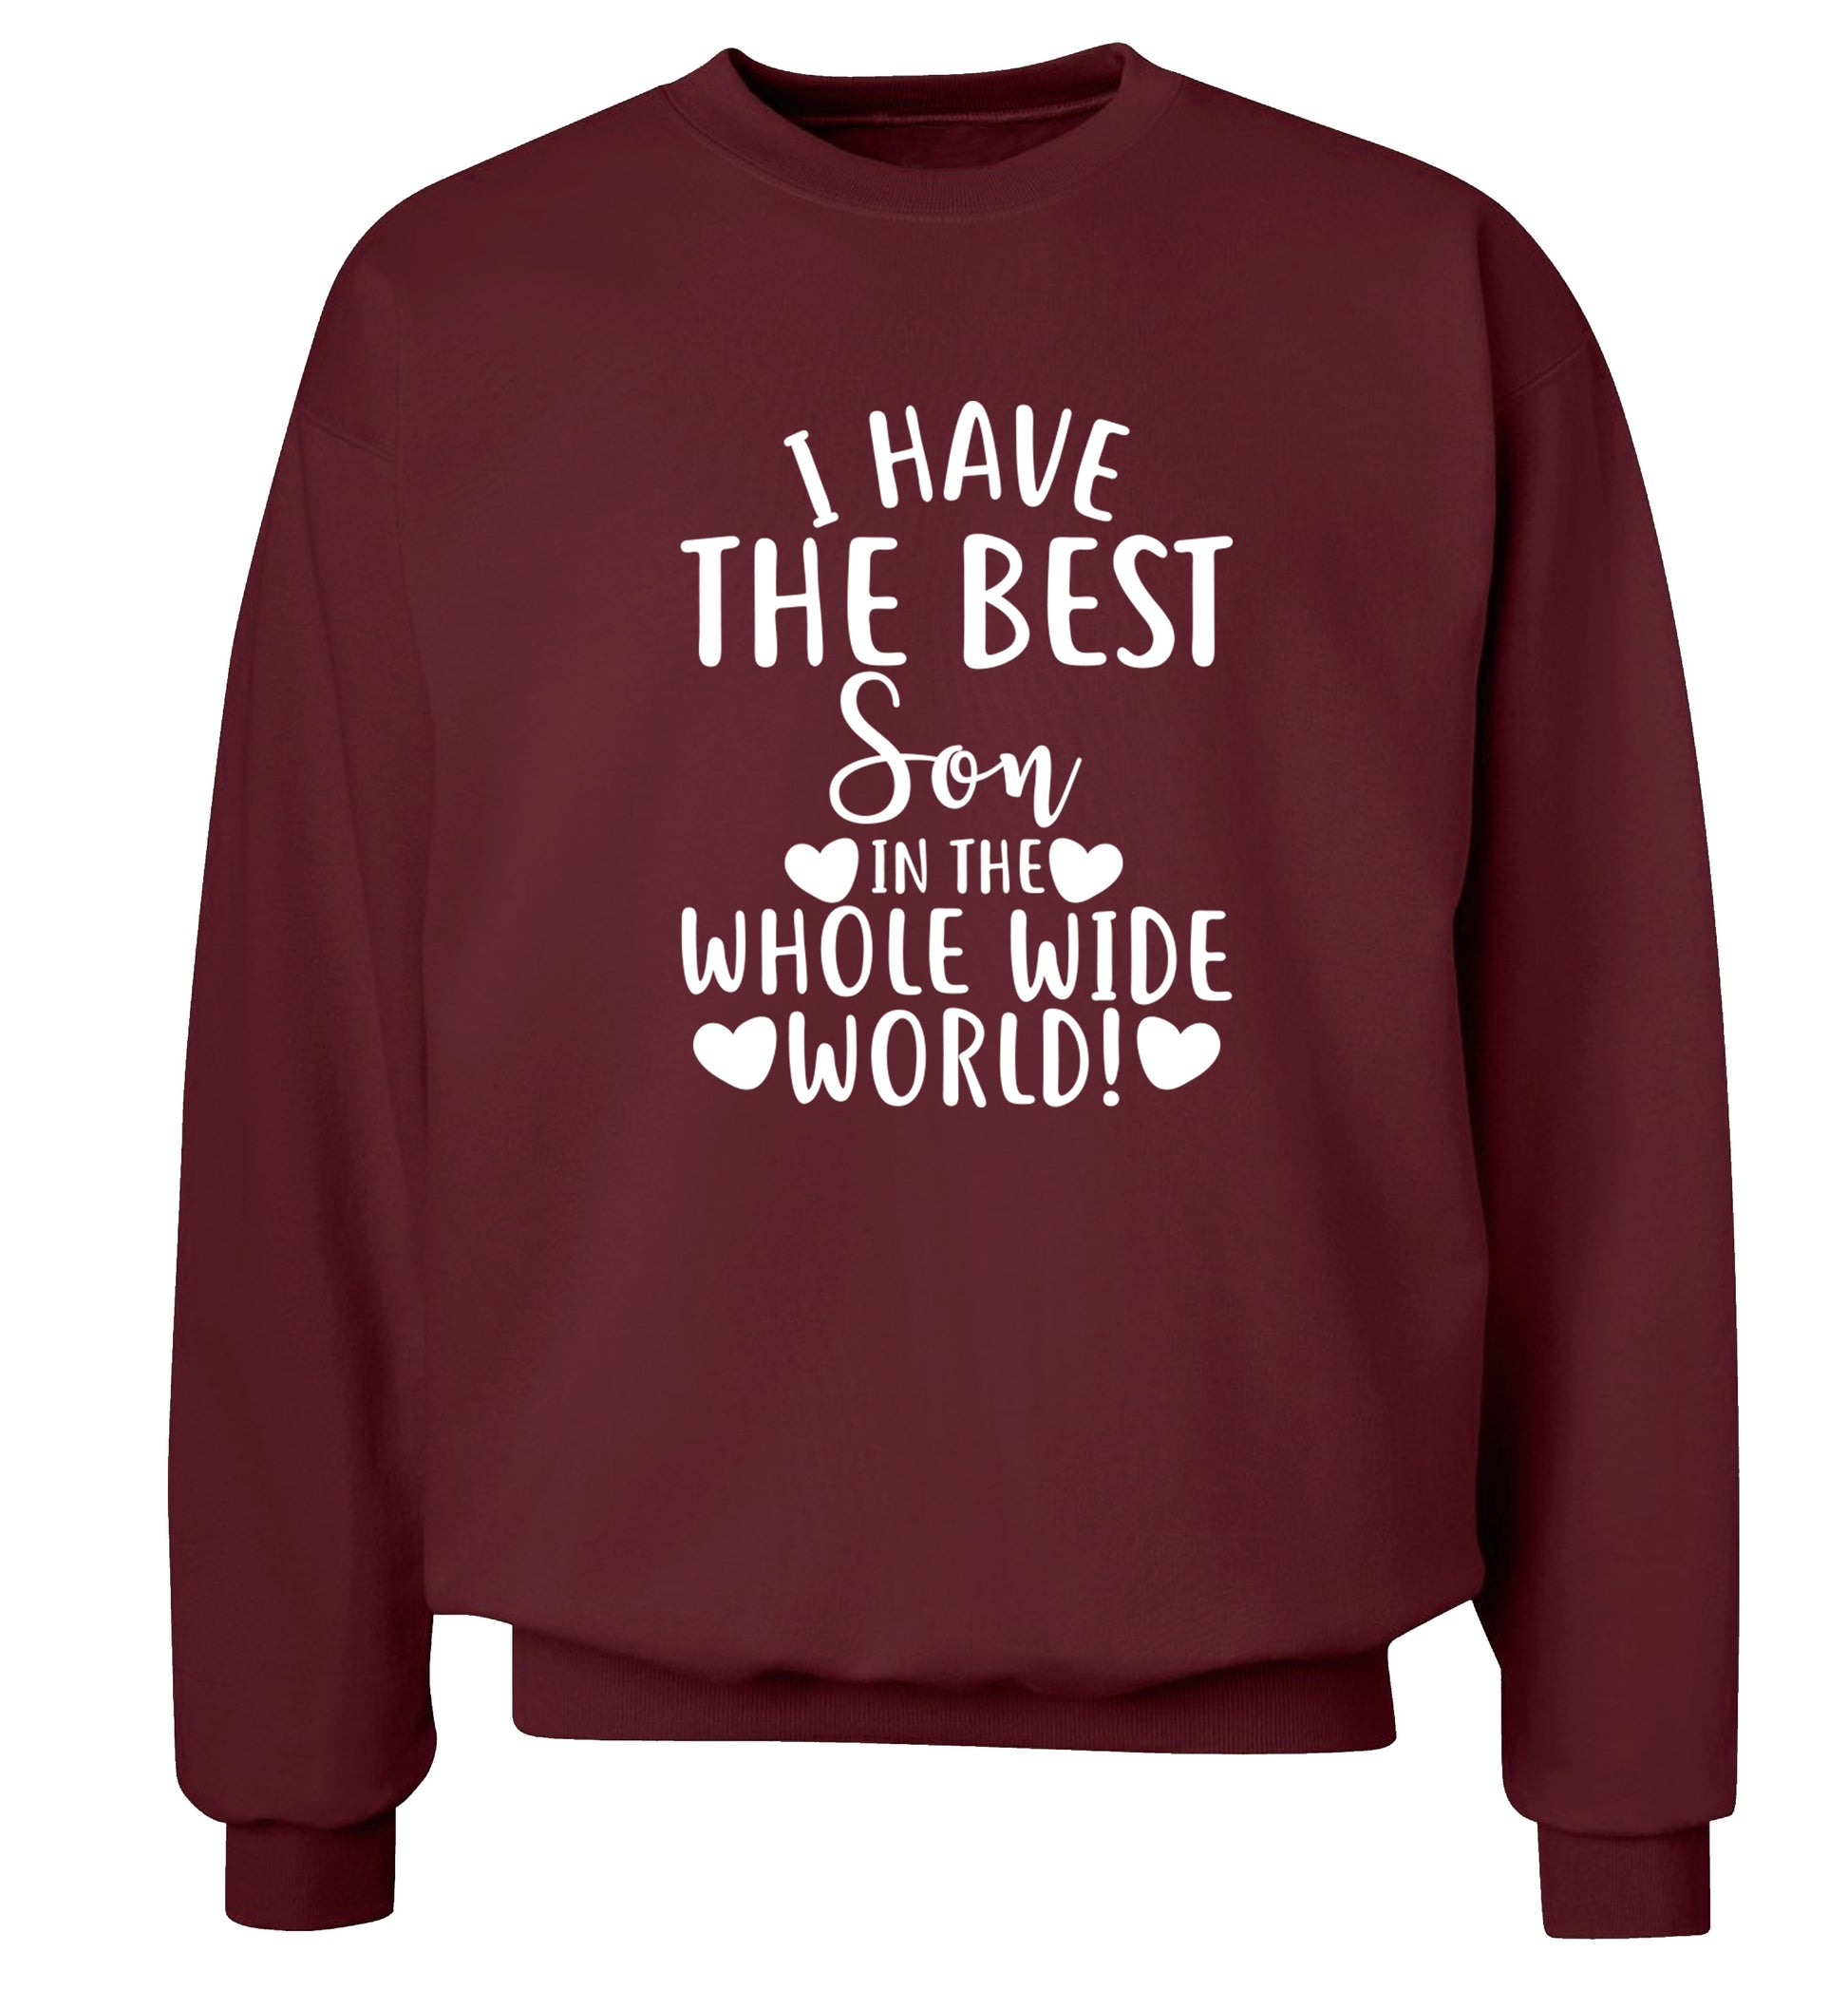 I have the best son in the whole wide world! Adult's unisex maroon Sweater 2XL